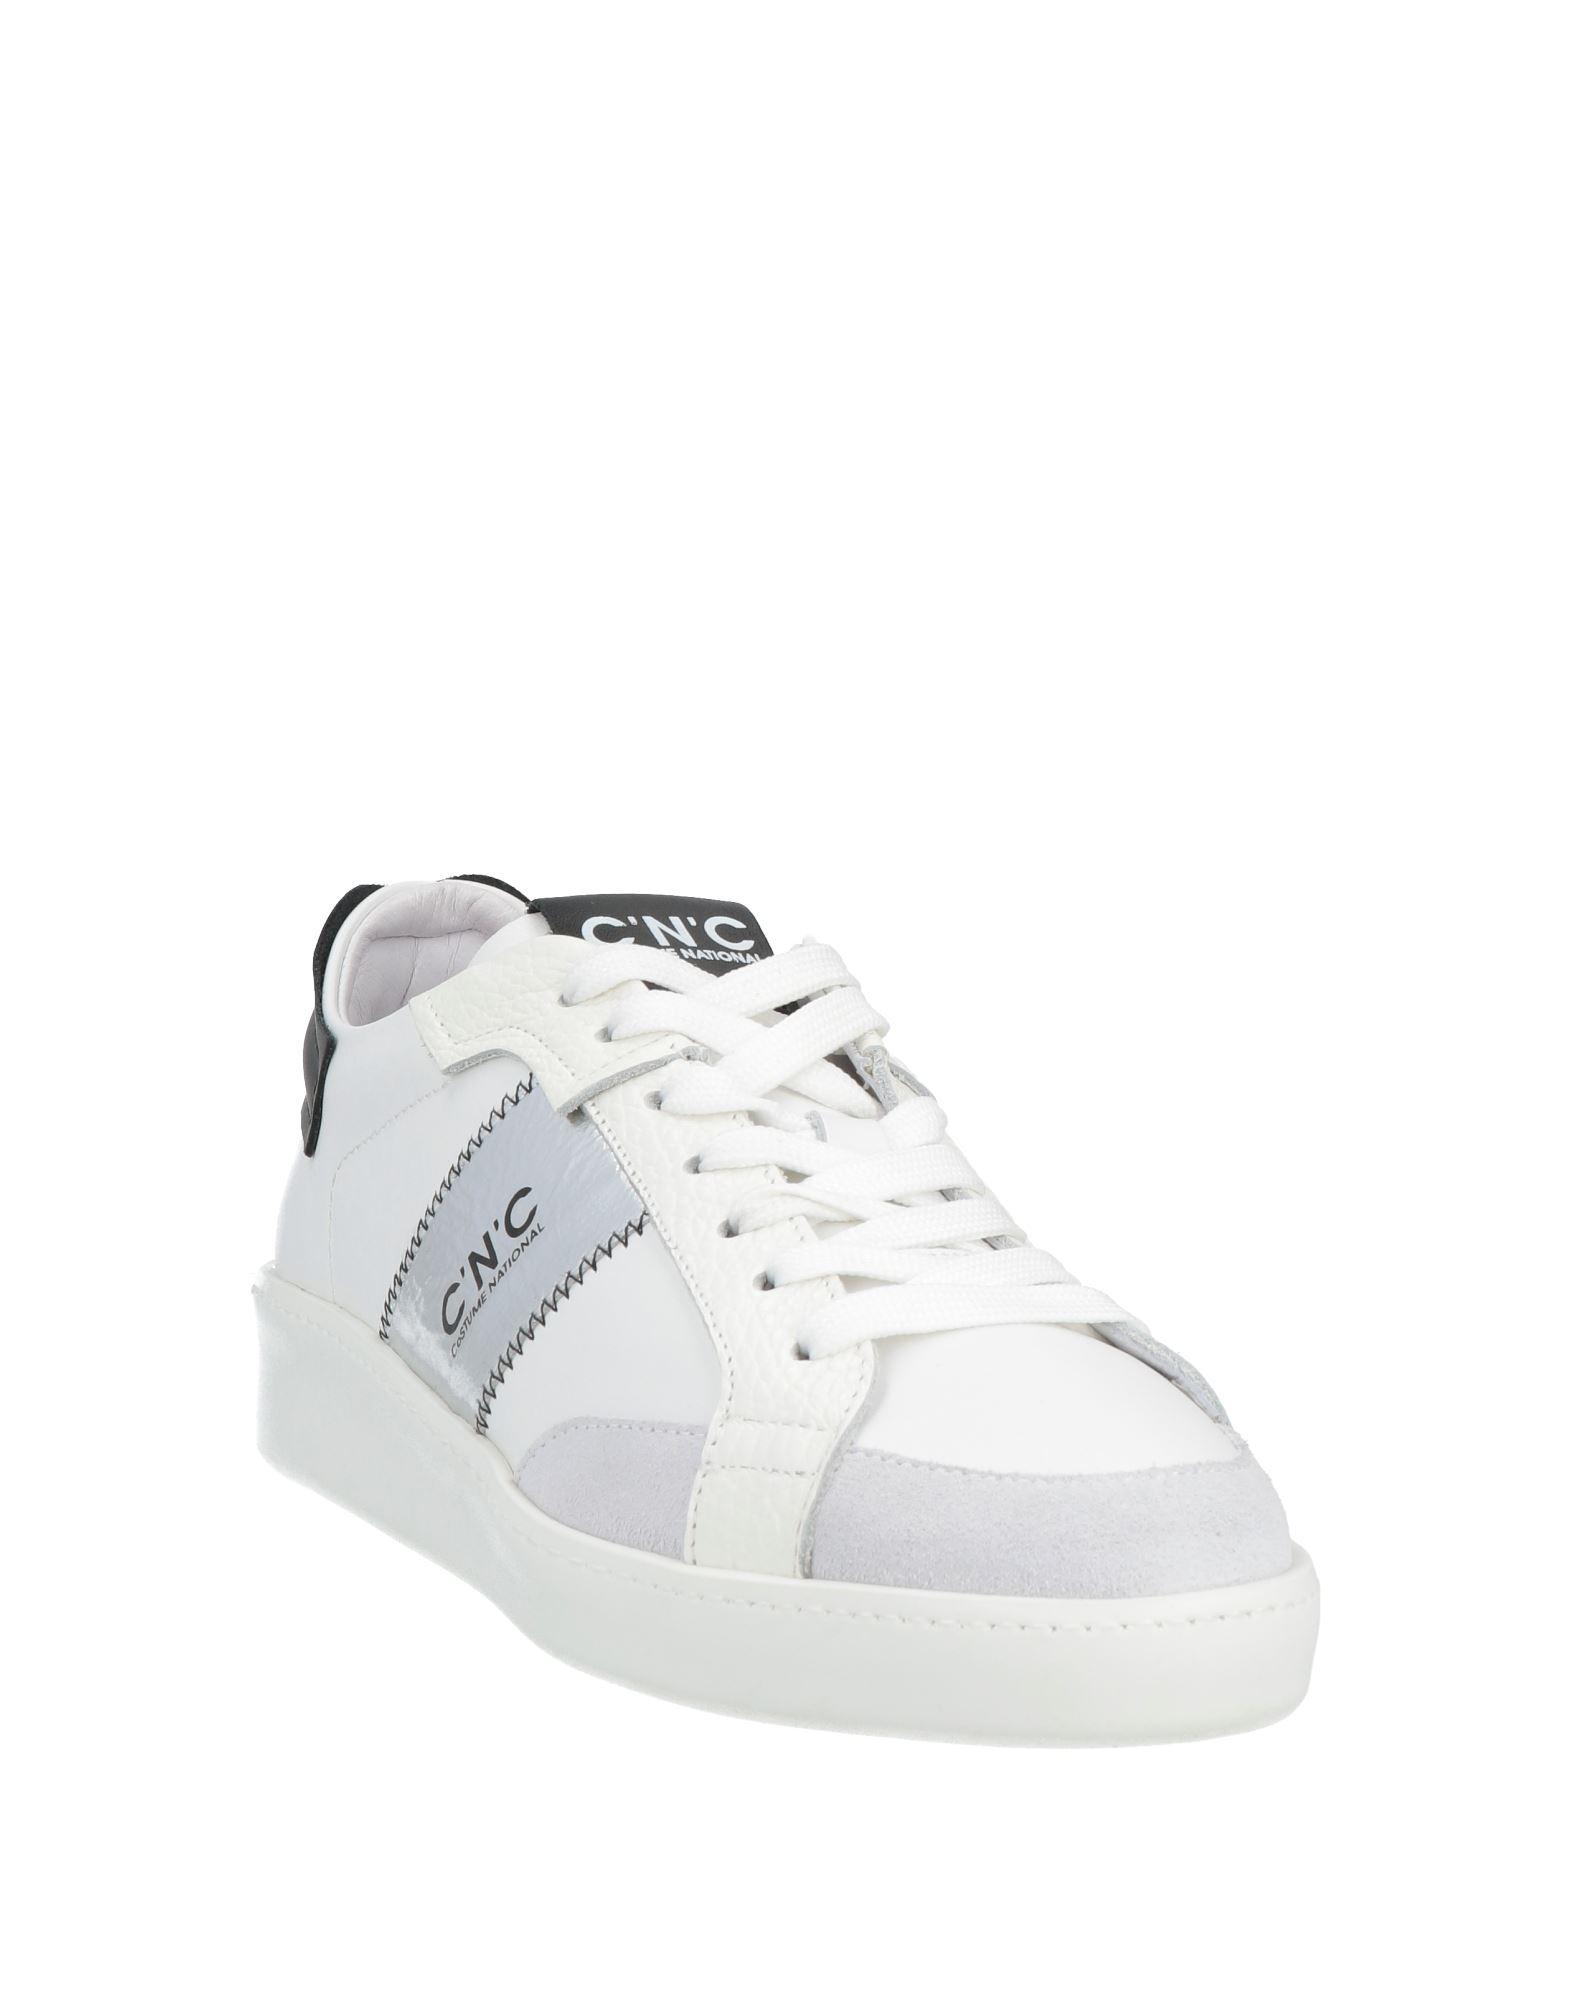 CoSTUME NATIONAL Trainers in White | Lyst